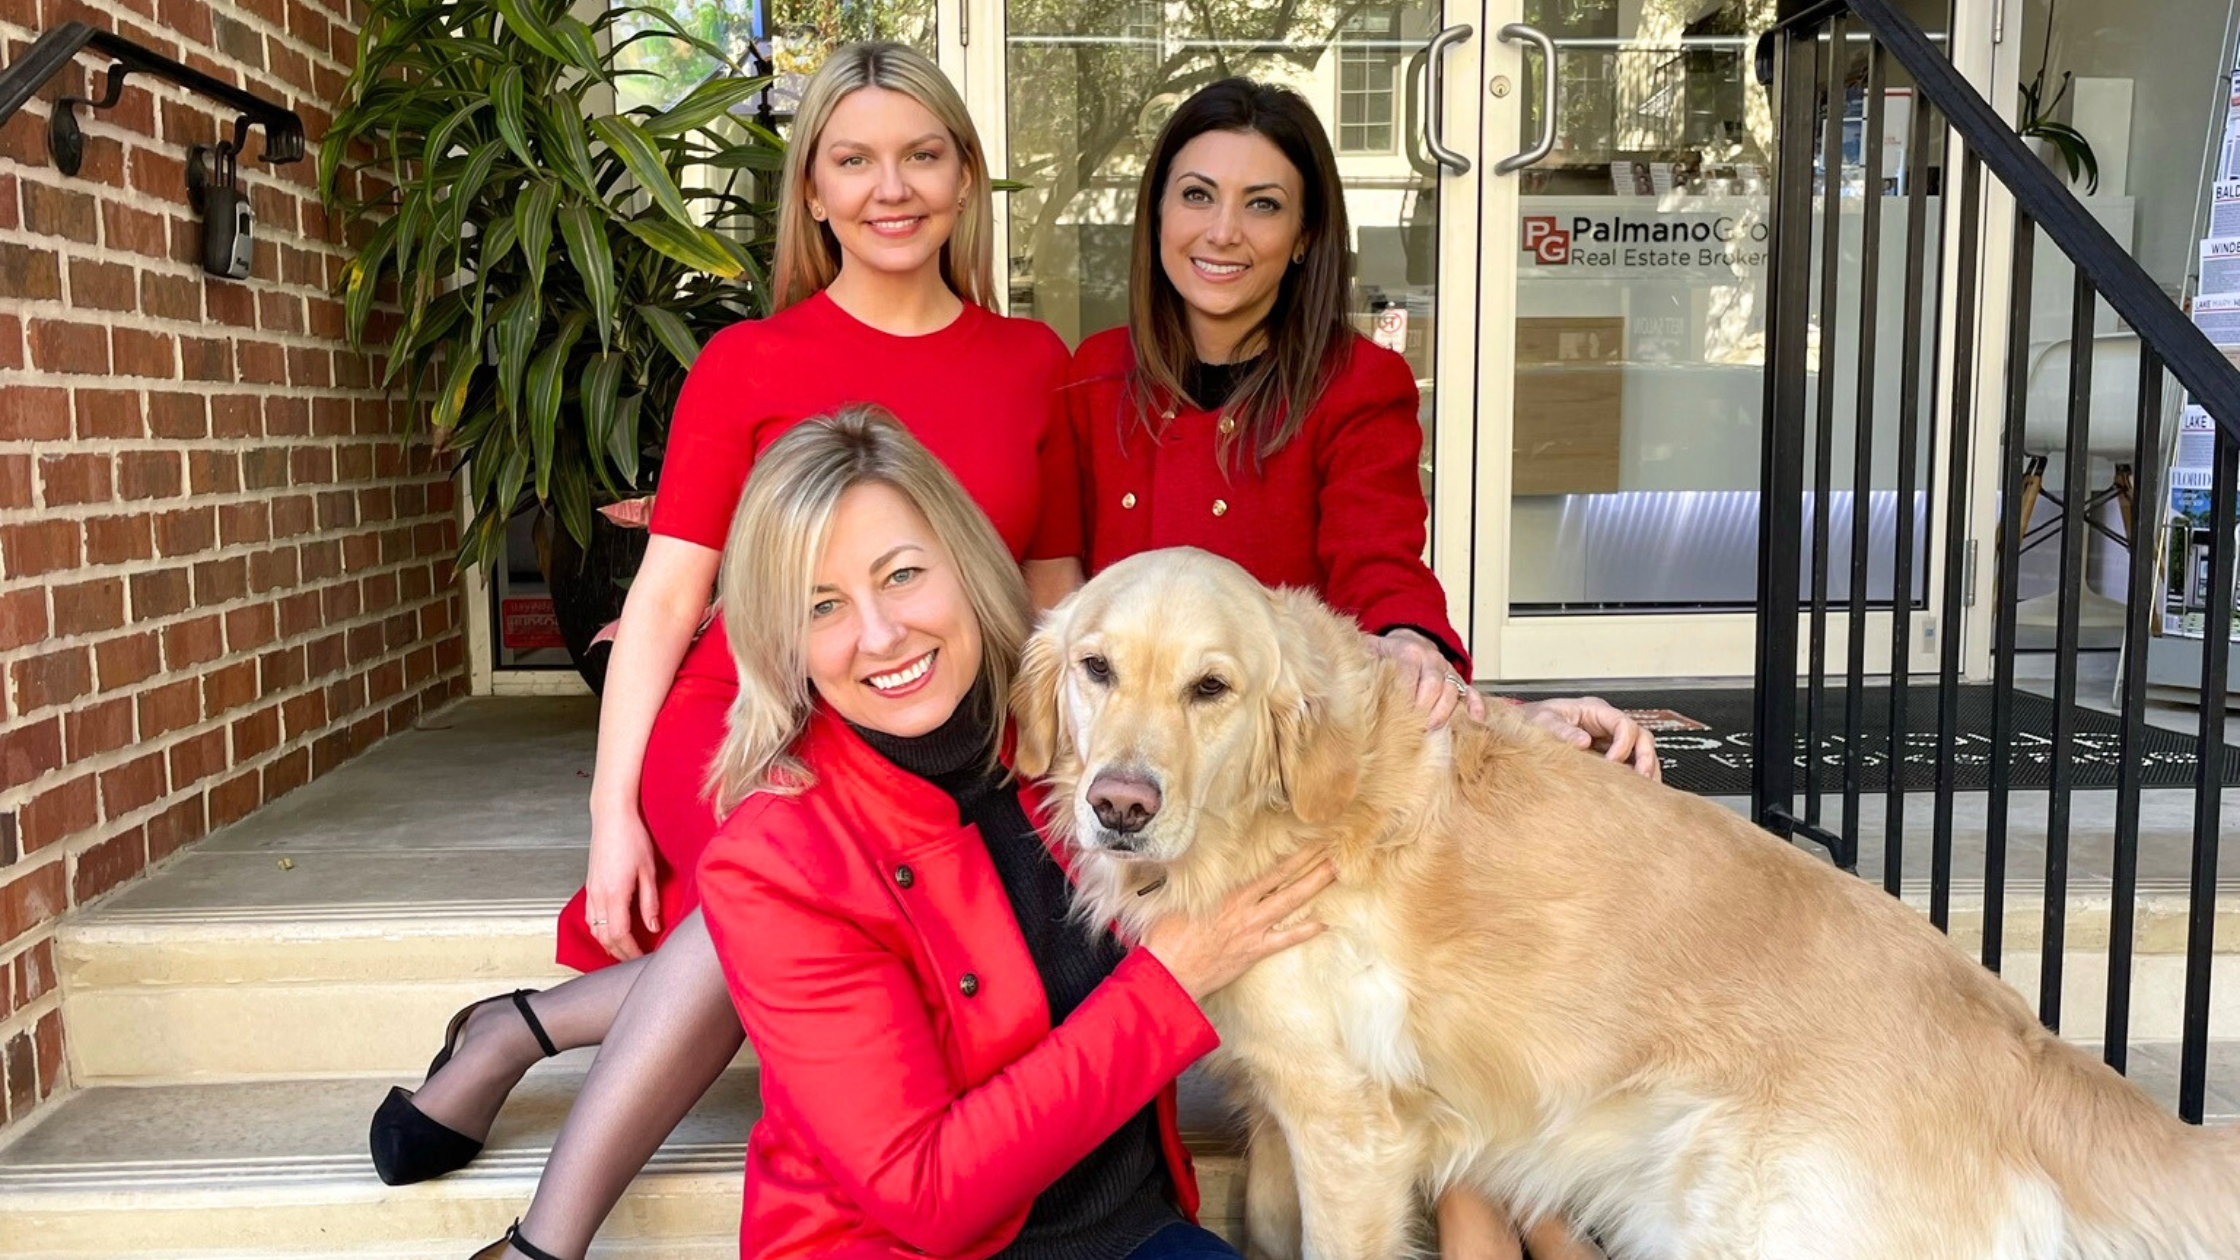 real estate agents at the office of palmano group real estate brokerage in winter park florida, their dog bruno, who is a golden retriever is sitting on the steps wiuth them